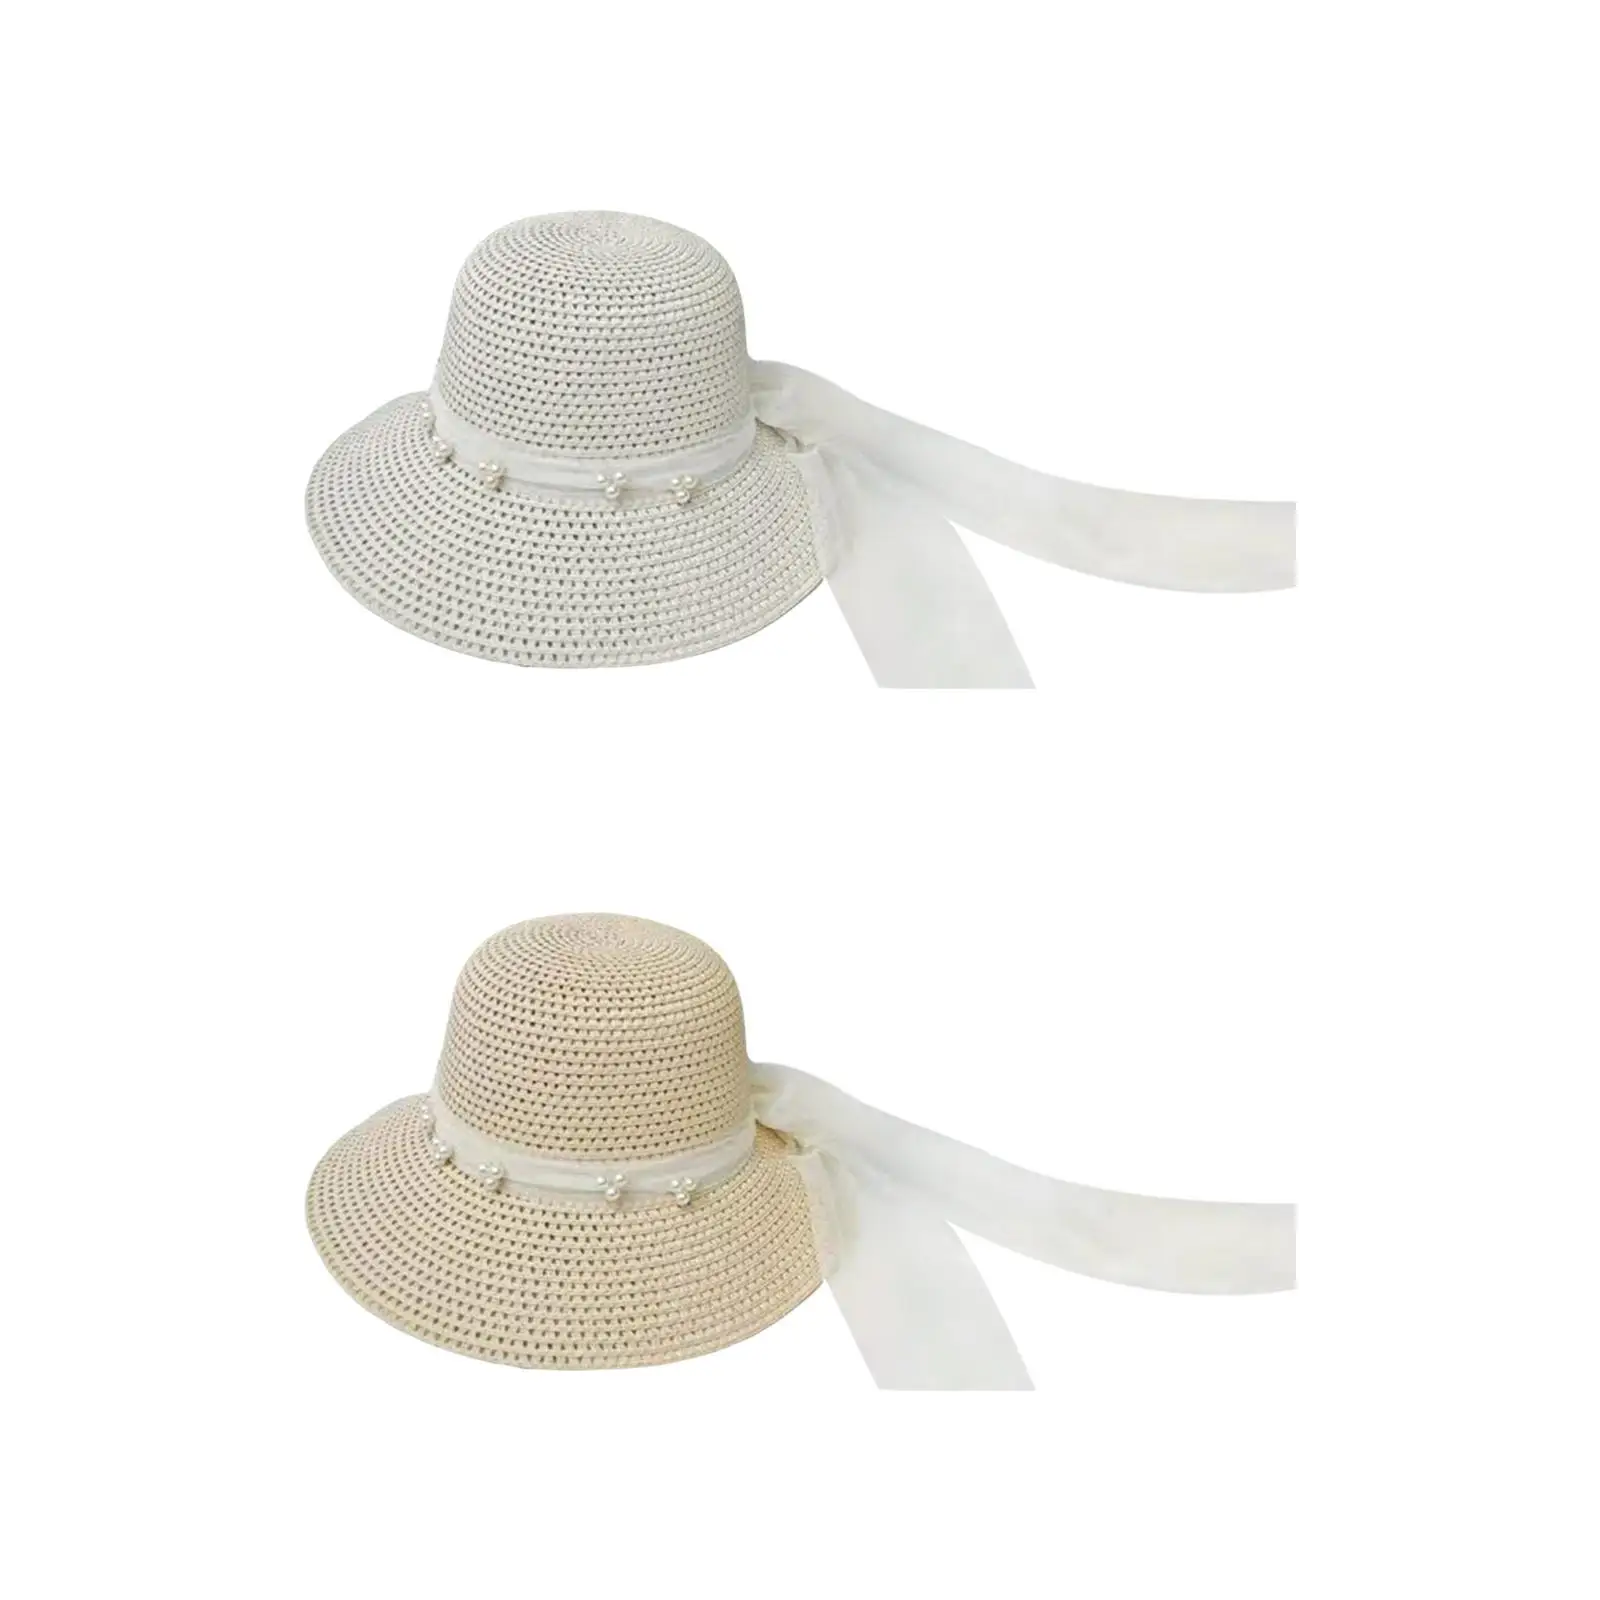 Womens Straw Hats Summer Beach Cap Lightweight Packable Ribbon Tie Wide Brim Visor Hats Bucket Hat for Holiday Vacation Outdoor